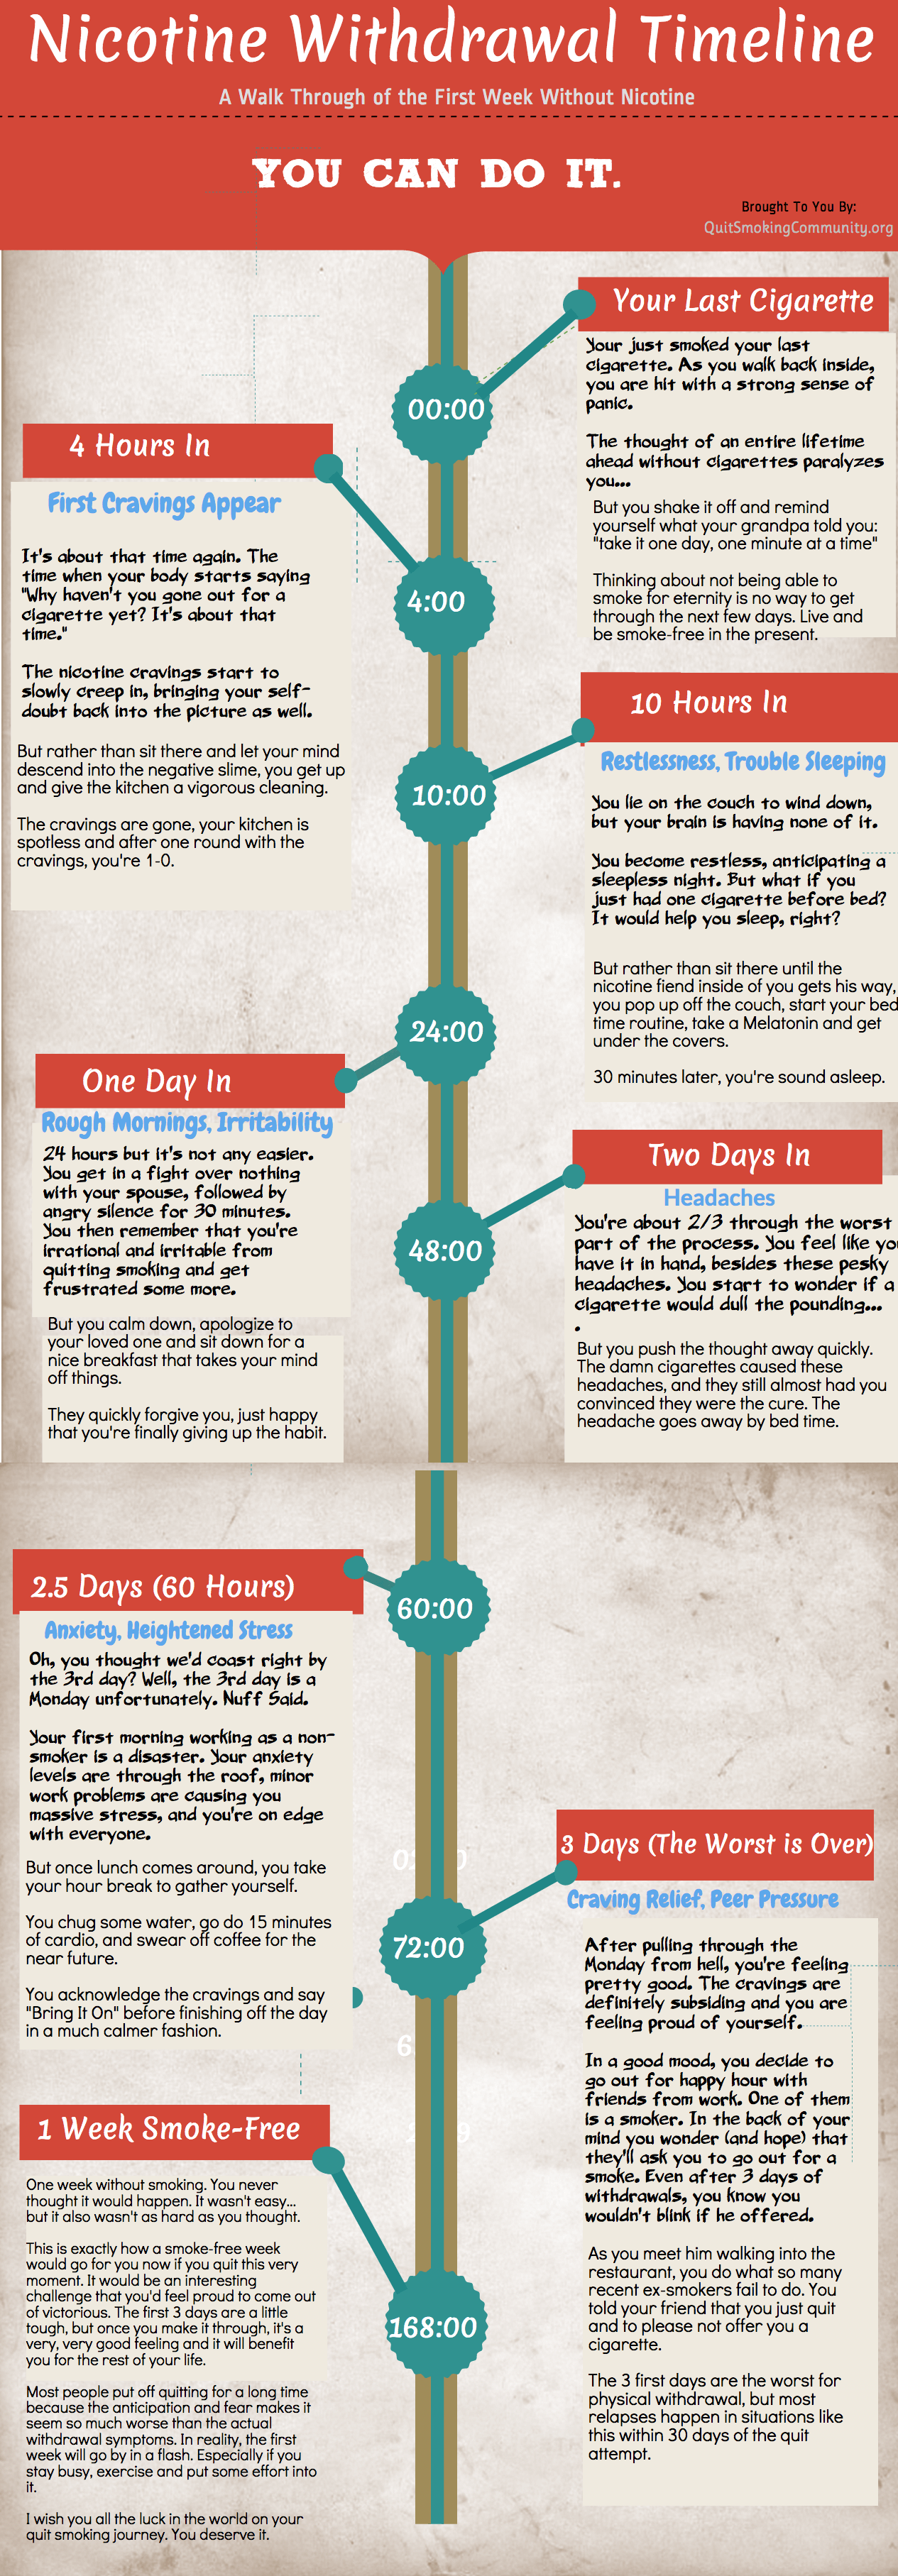 Nicotine Withdrawal Symptoms and Timeline | Infographic